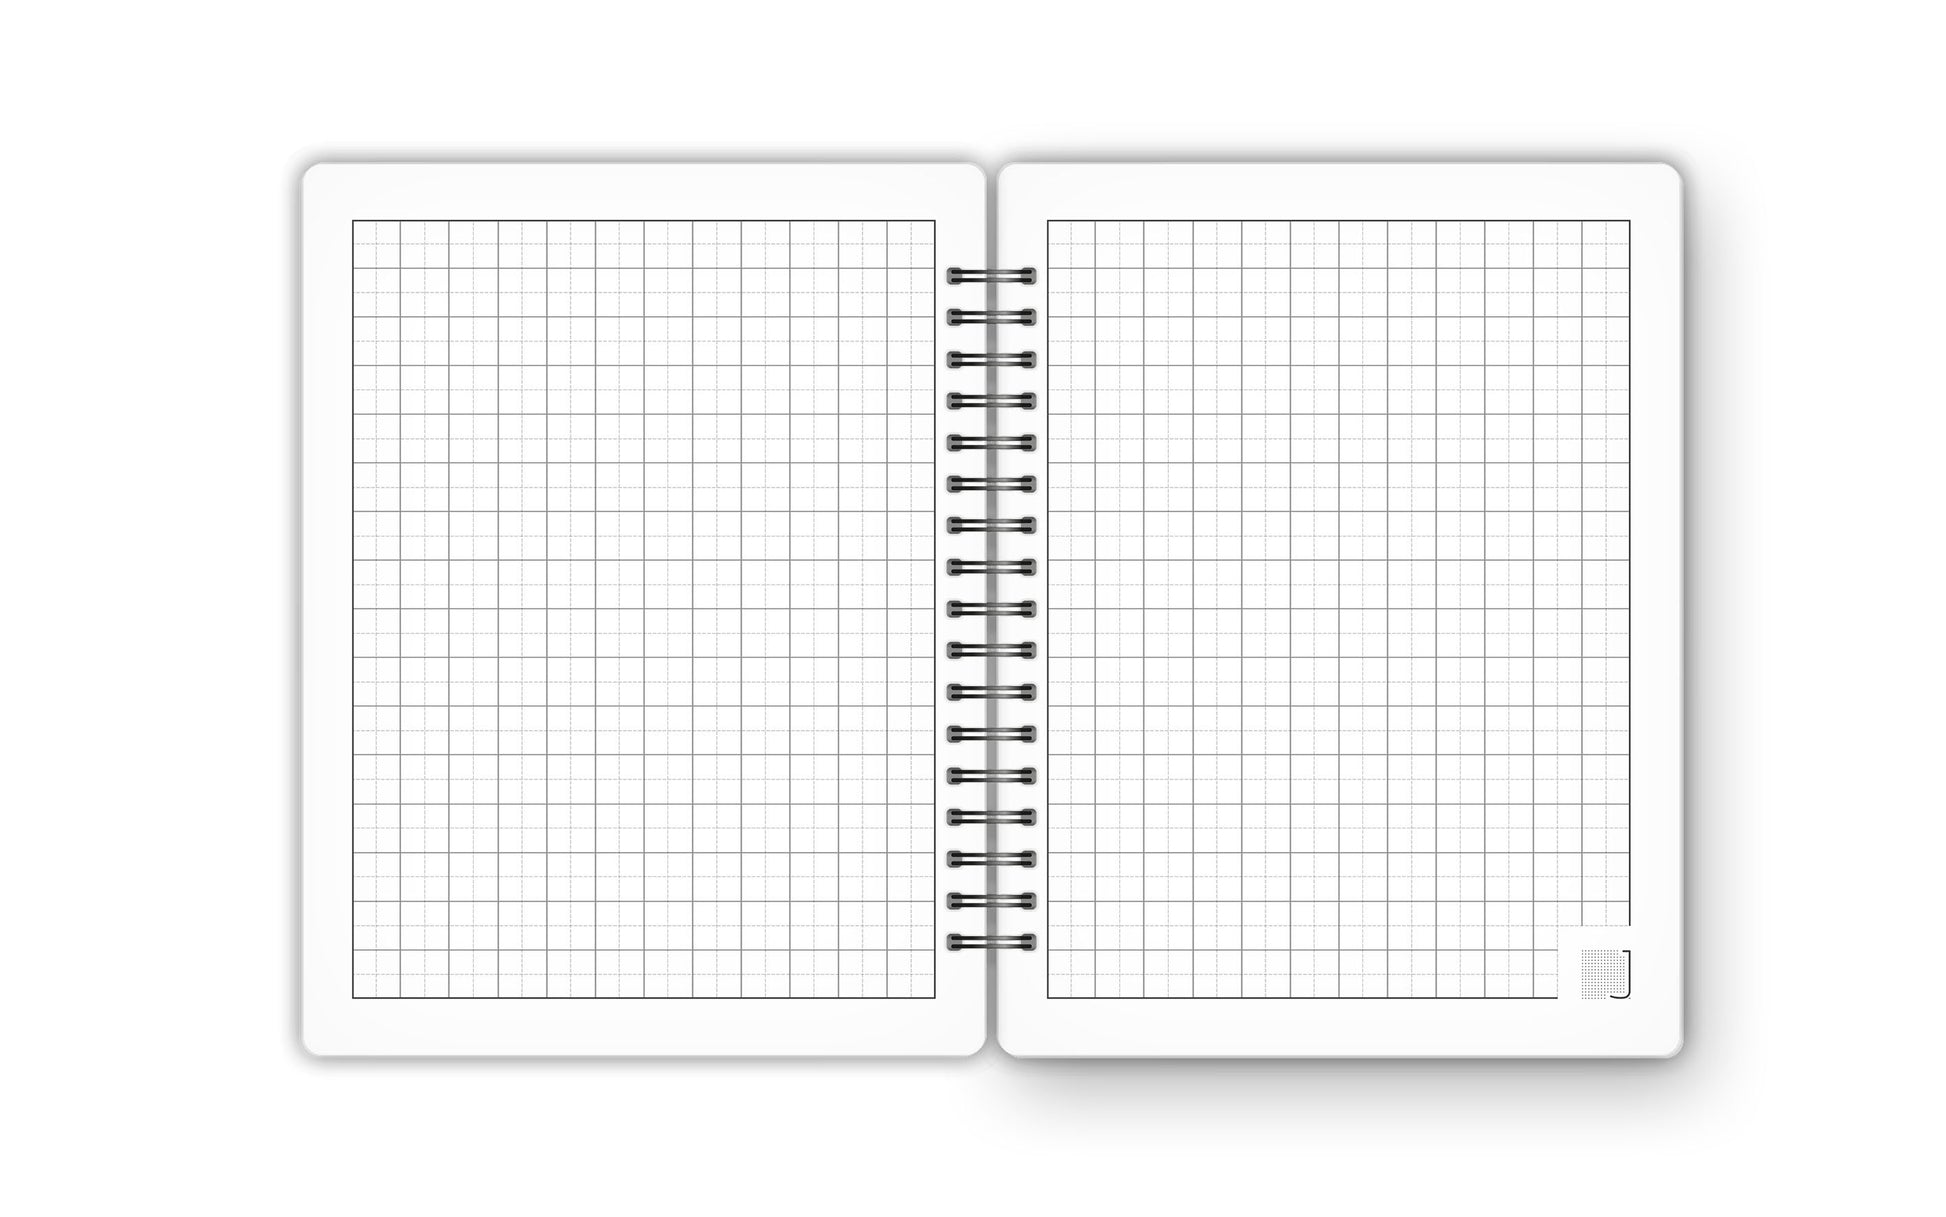 Square Grid - 18X14 cm - 75 Sheets | Minimal Leaf 03 - from Journals